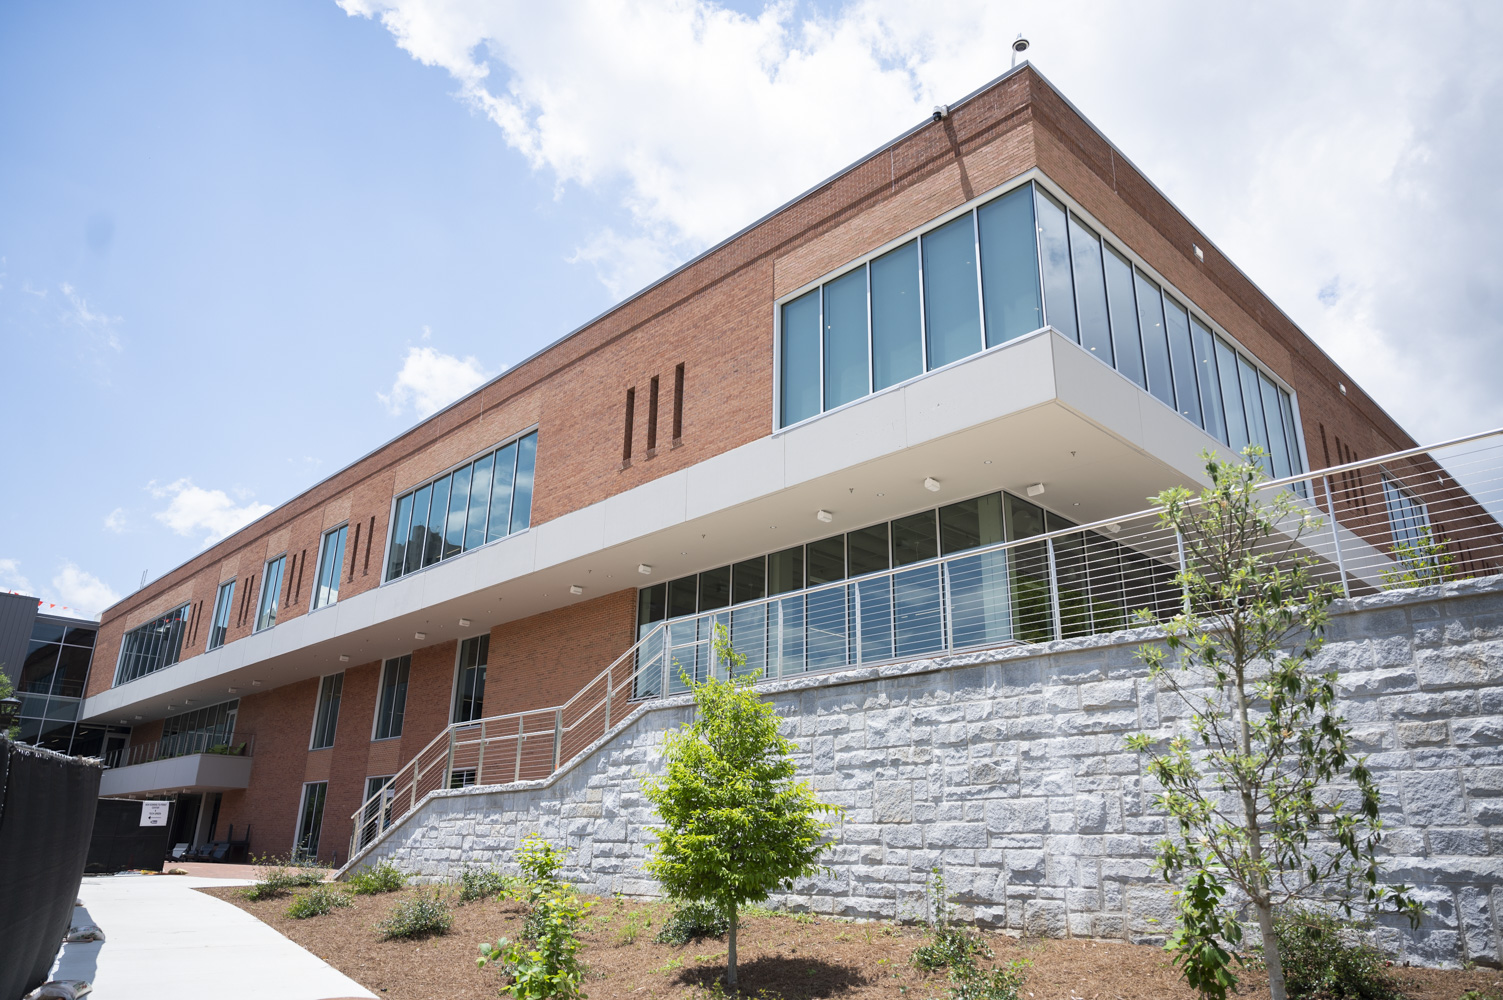 Exterior of the John Lewis Student Center which will open late July 22.